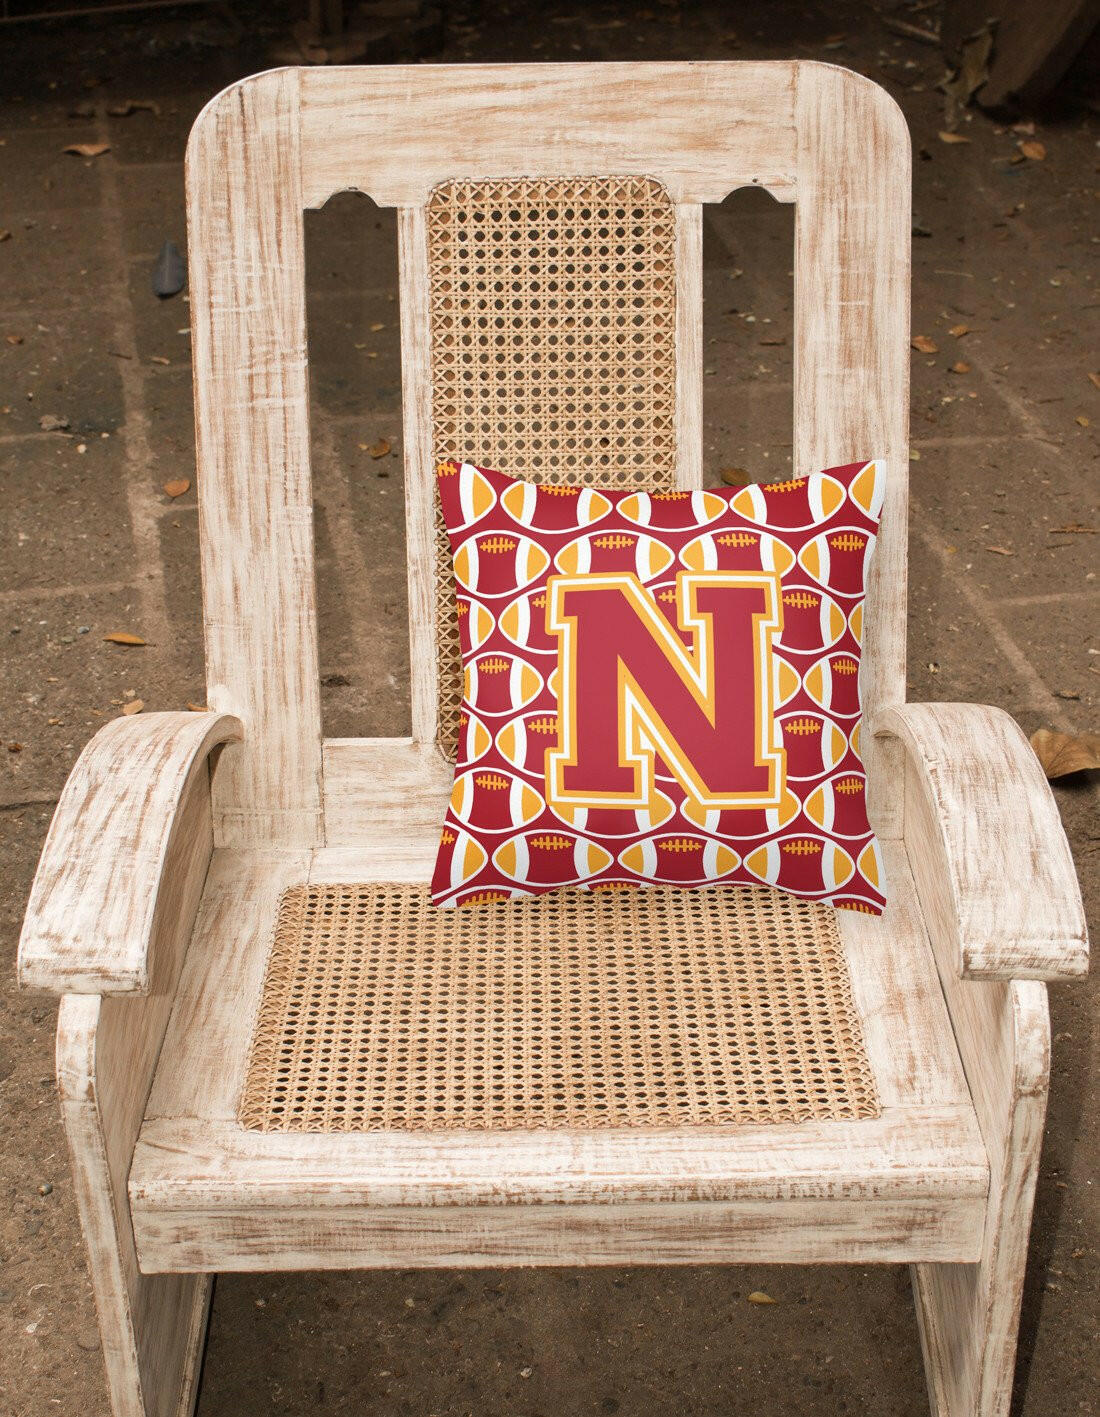 Letter N Football Cardinal and Gold Fabric Decorative Pillow CJ1070-NPW1414 by Caroline's Treasures